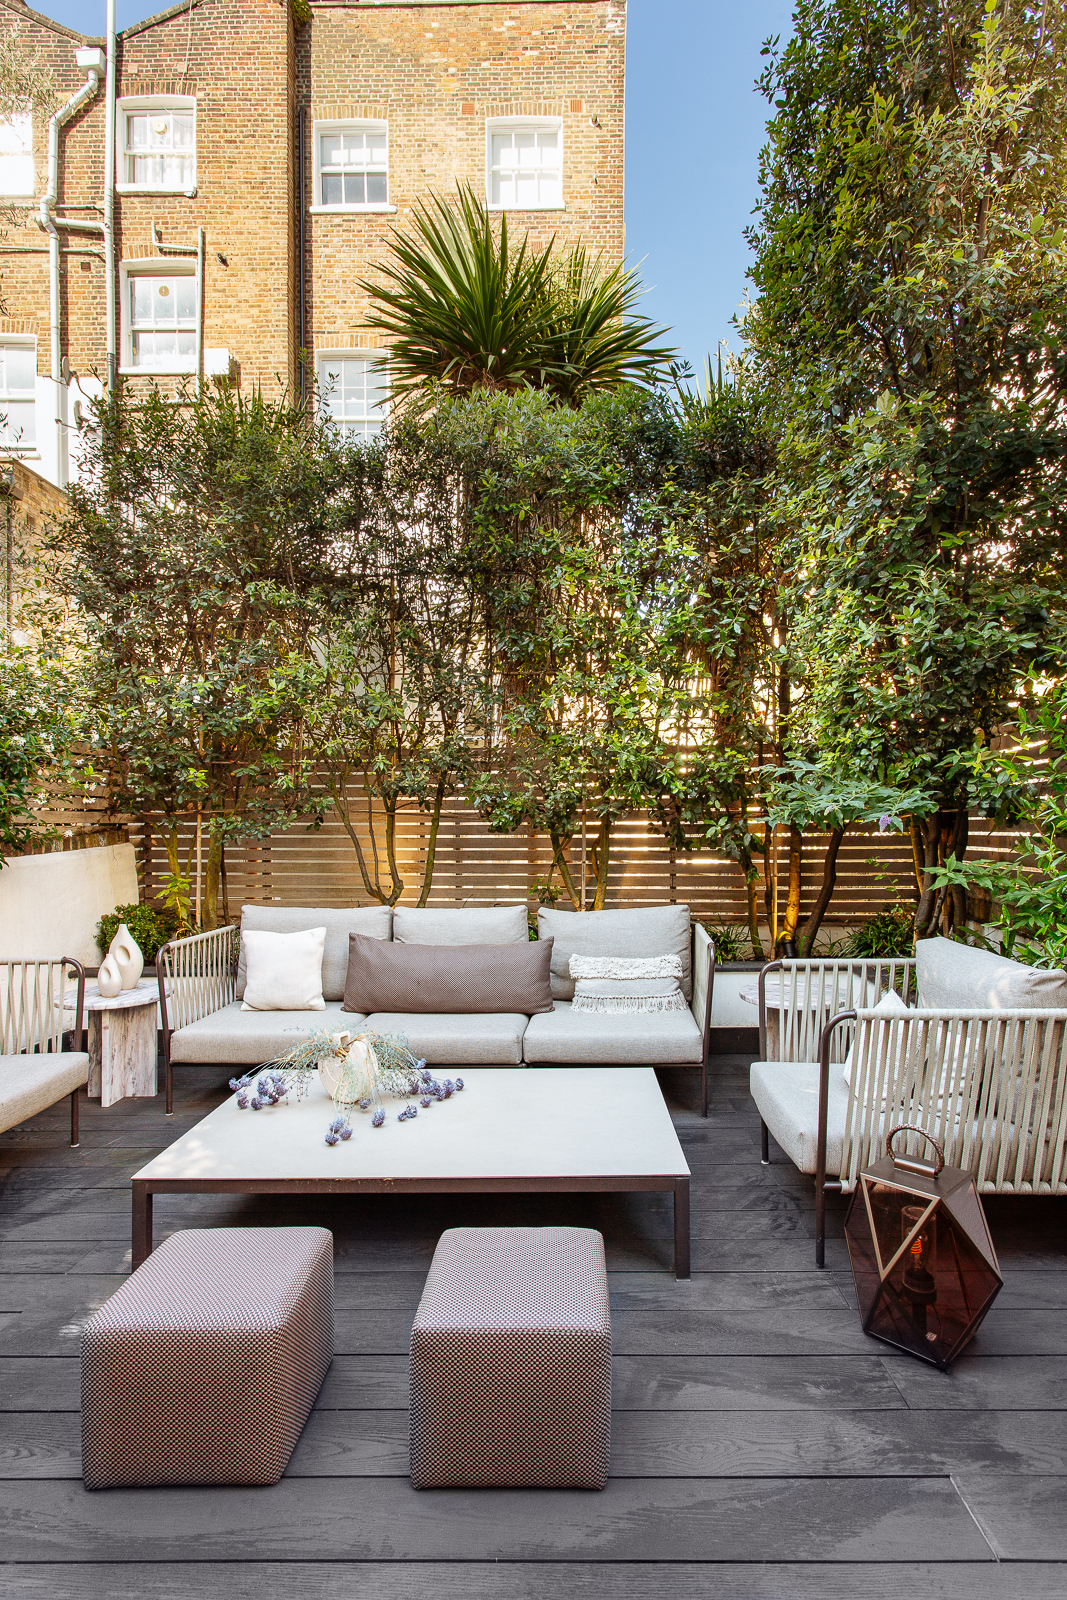 The design-led garden of a luxury townhouse in Notting Hill